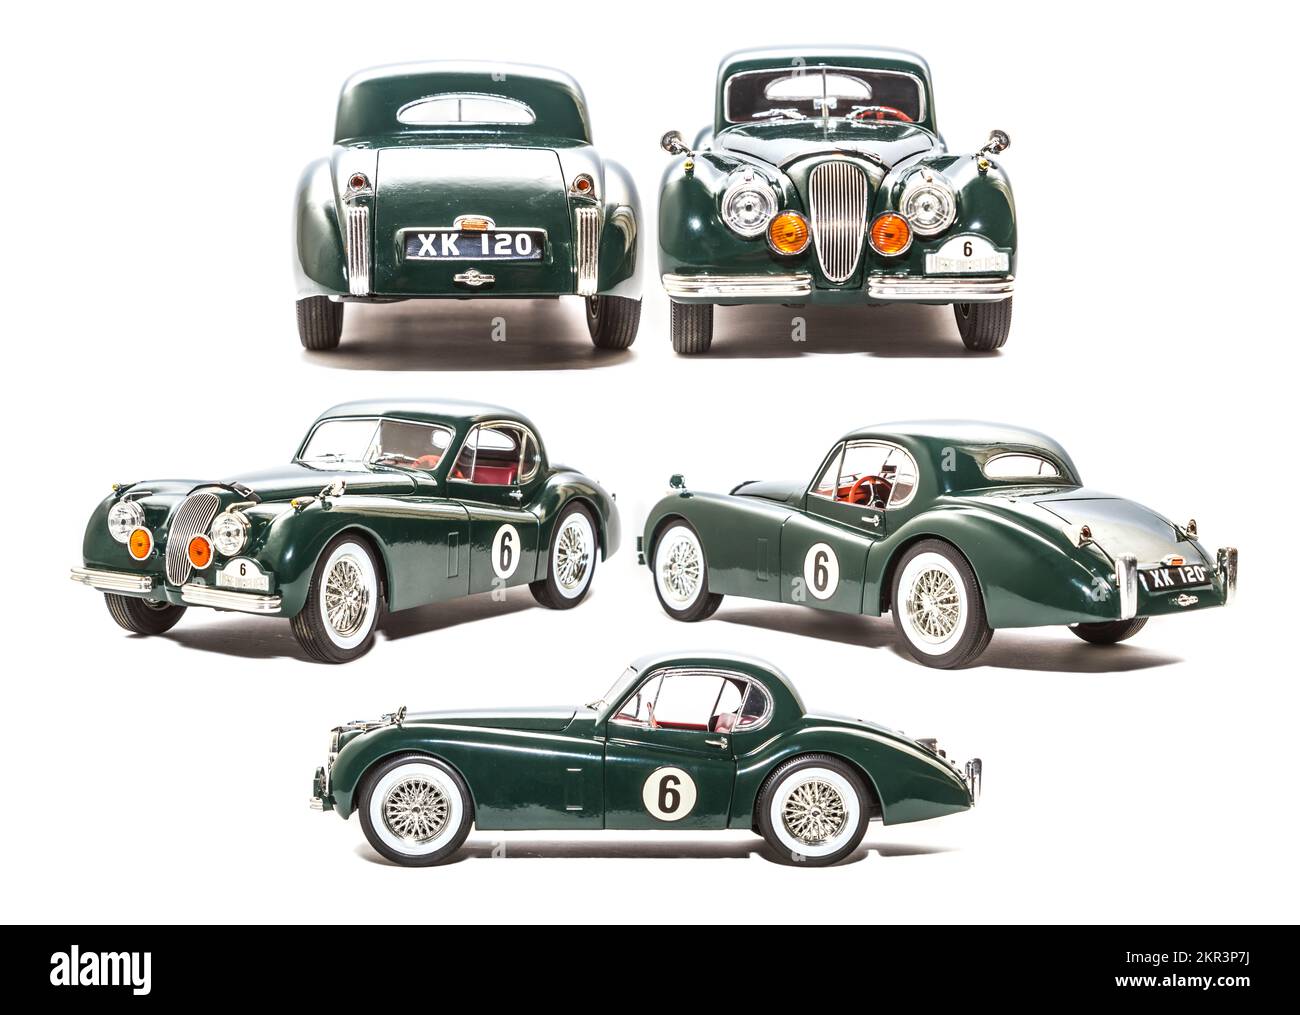 An all angles take on the luxuriously stylish Jaguar XK 120 on white background Stock Photo